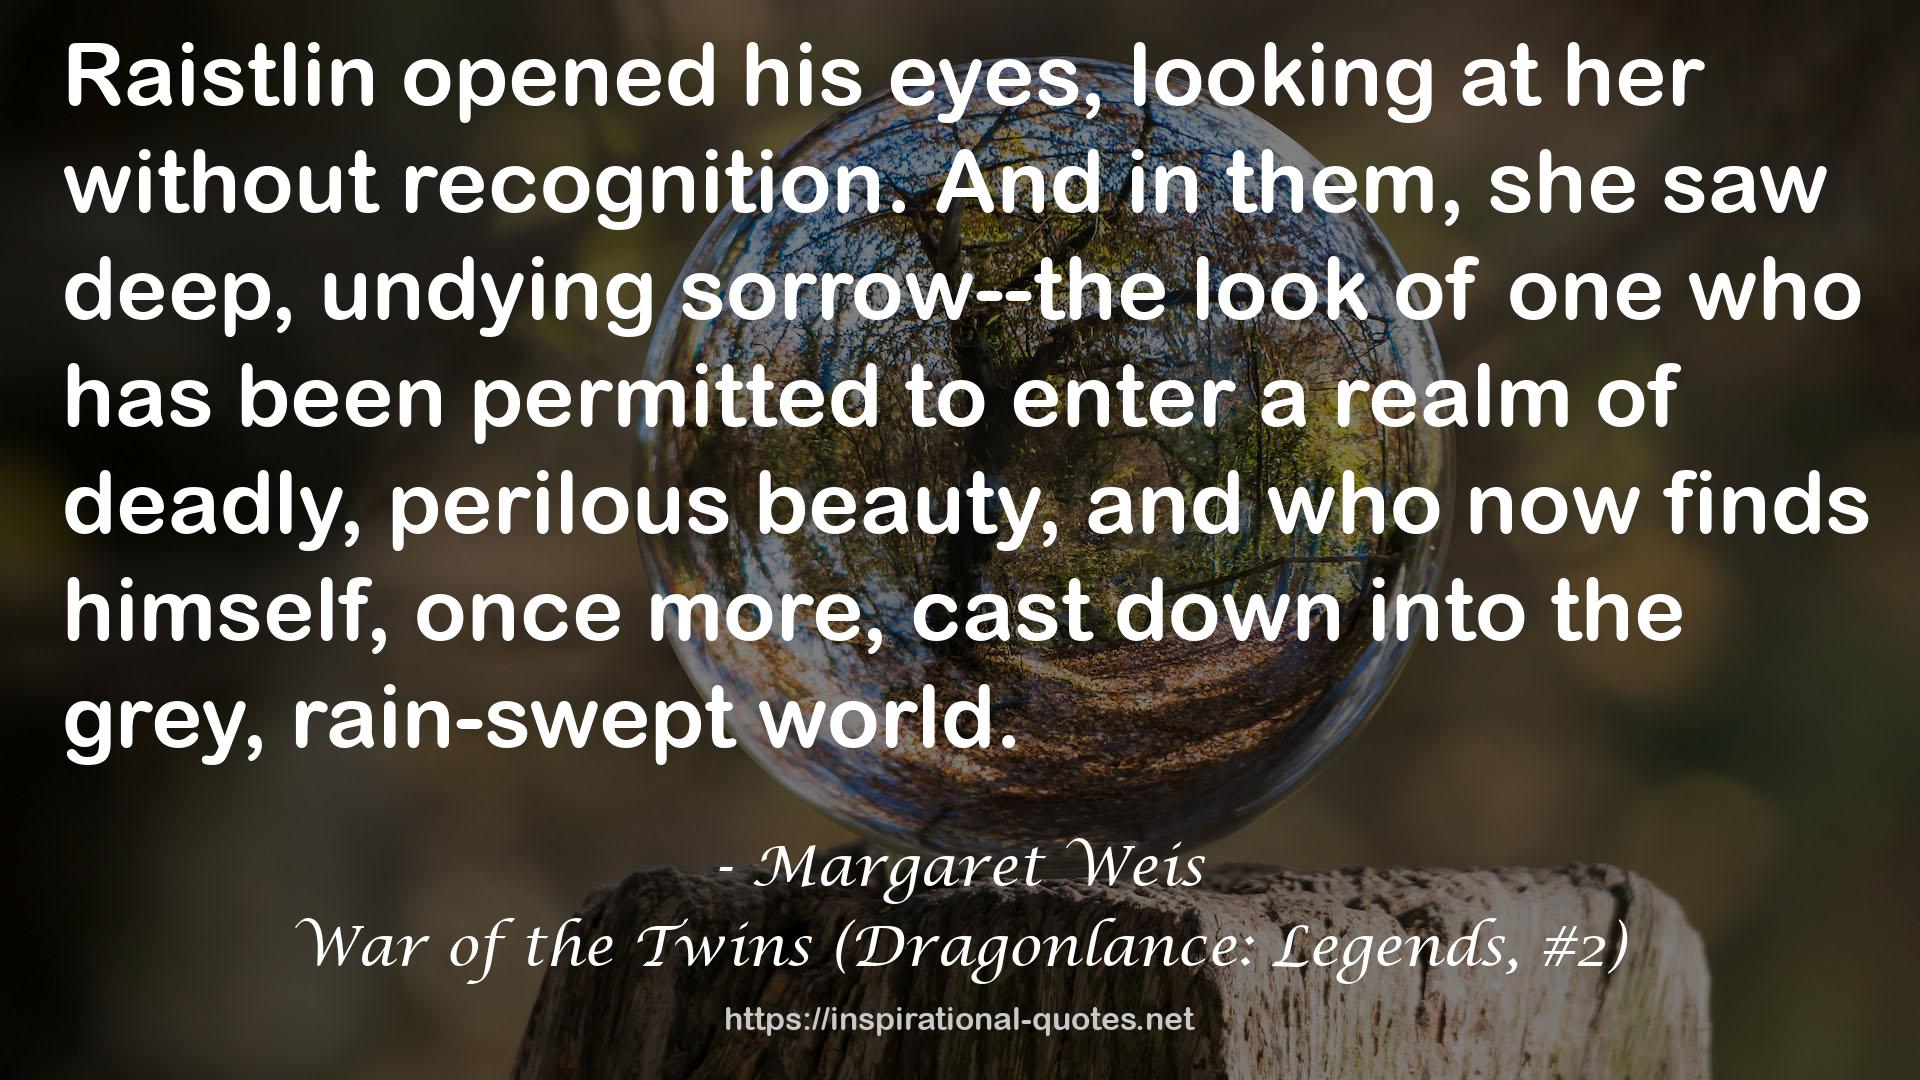 War of the Twins (Dragonlance: Legends, #2) QUOTES